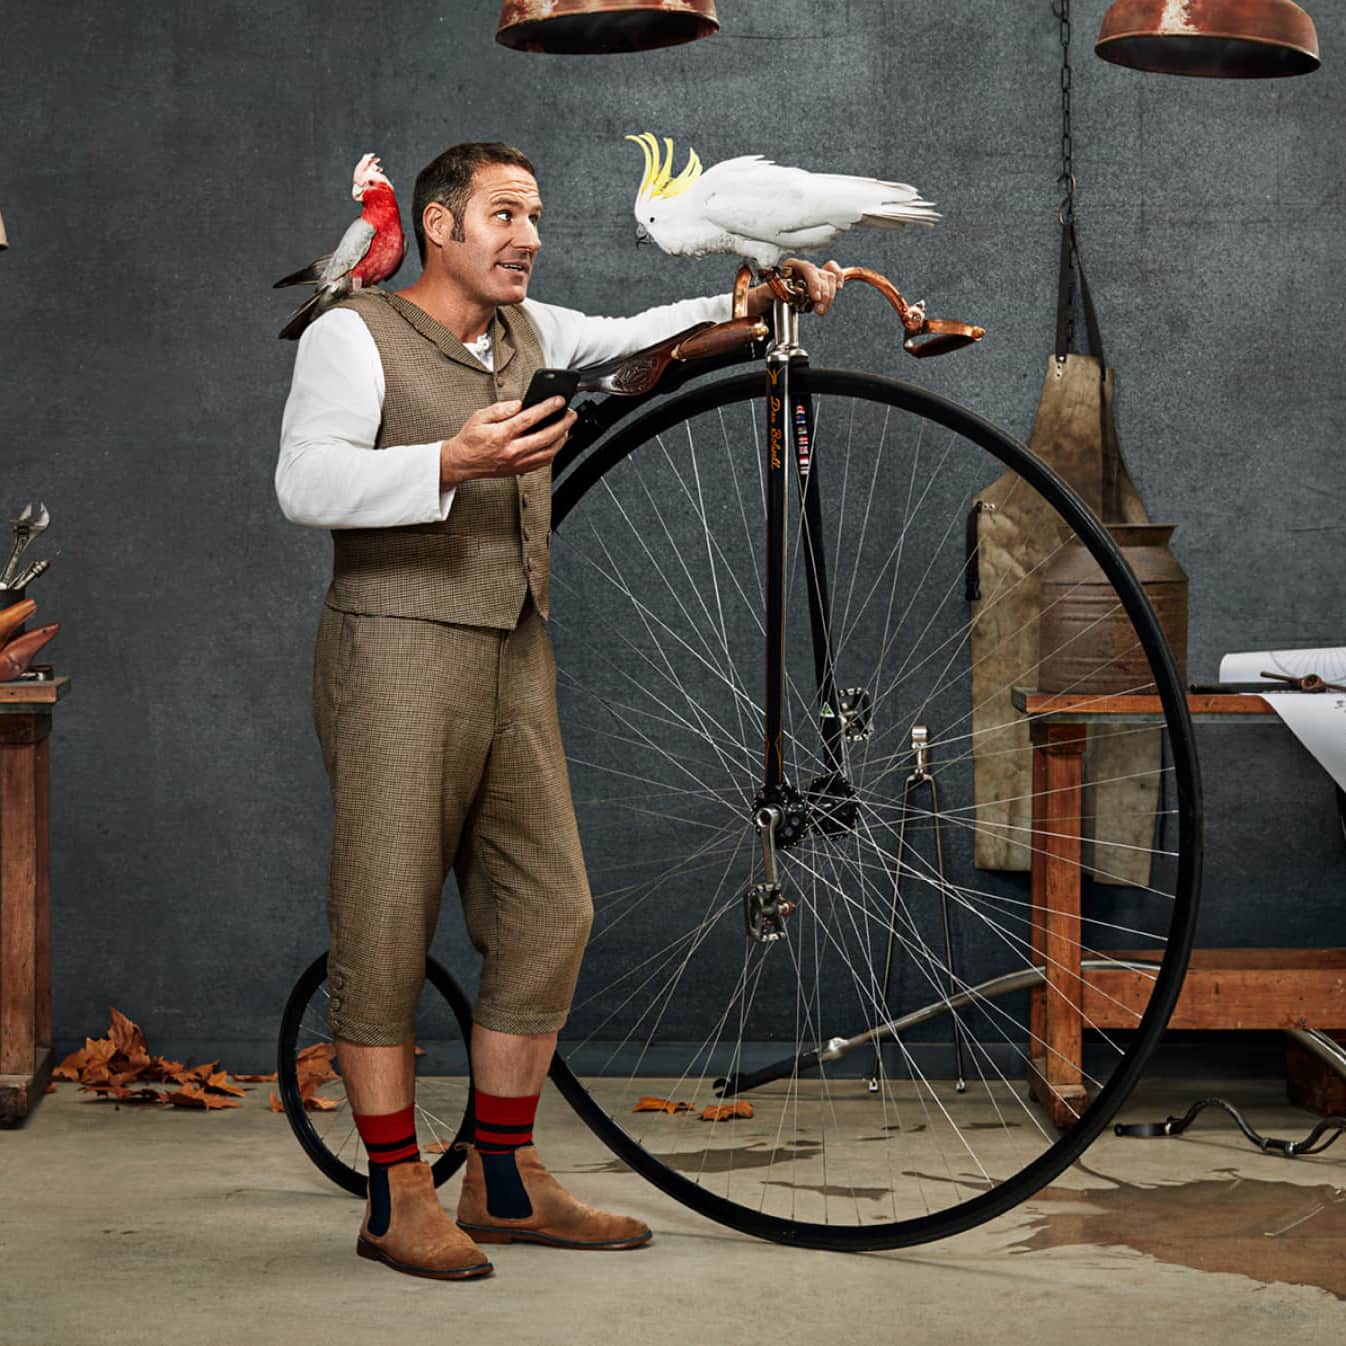 Dan Blowell stands with his penny-farthing bicycle, where a cockatoo bird randomly sits on the handles.